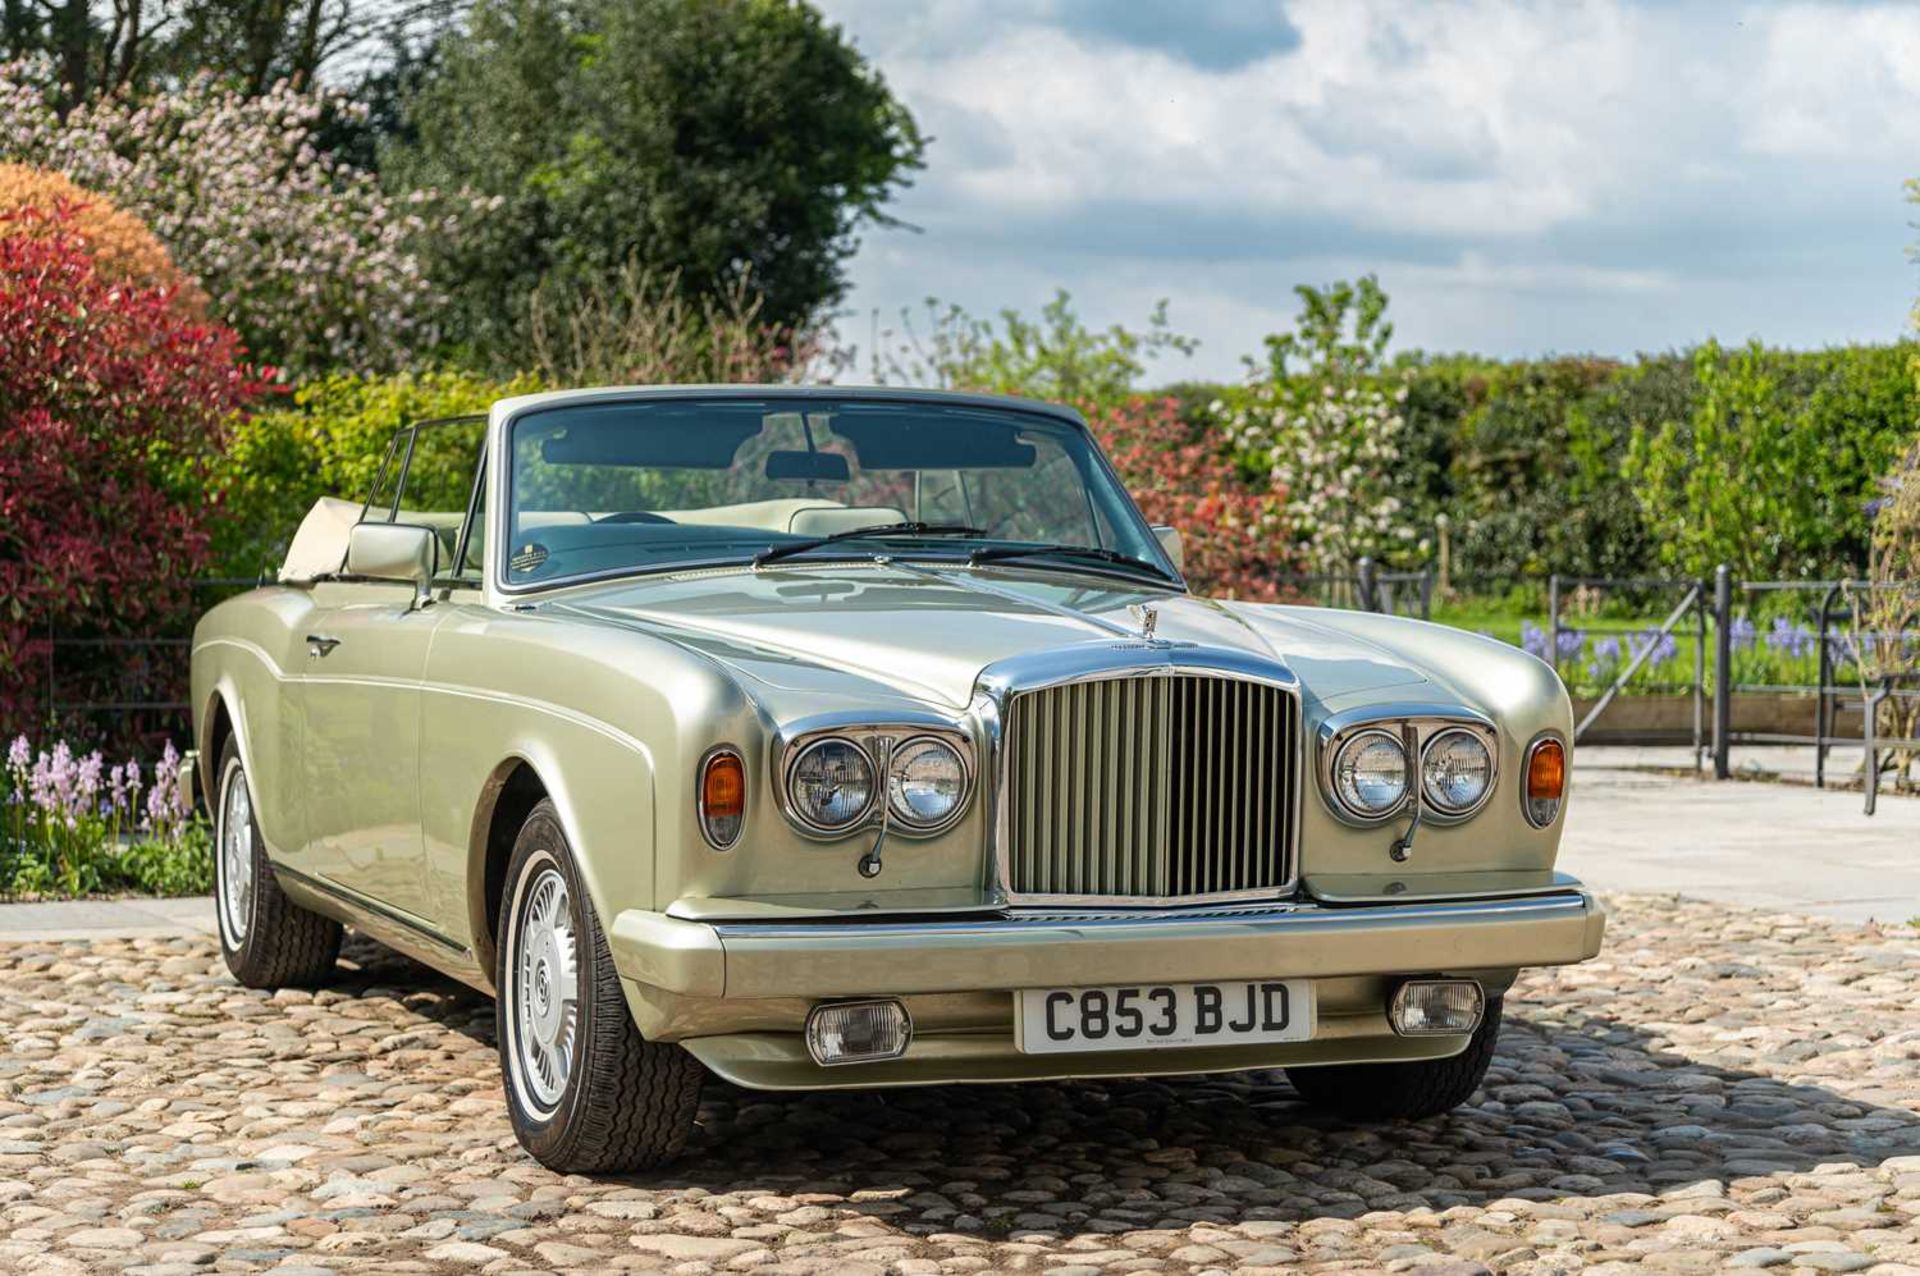 1985 Bentley Continental Convertible Rare early carburettor model by Mulliner Park Ward - Image 16 of 76